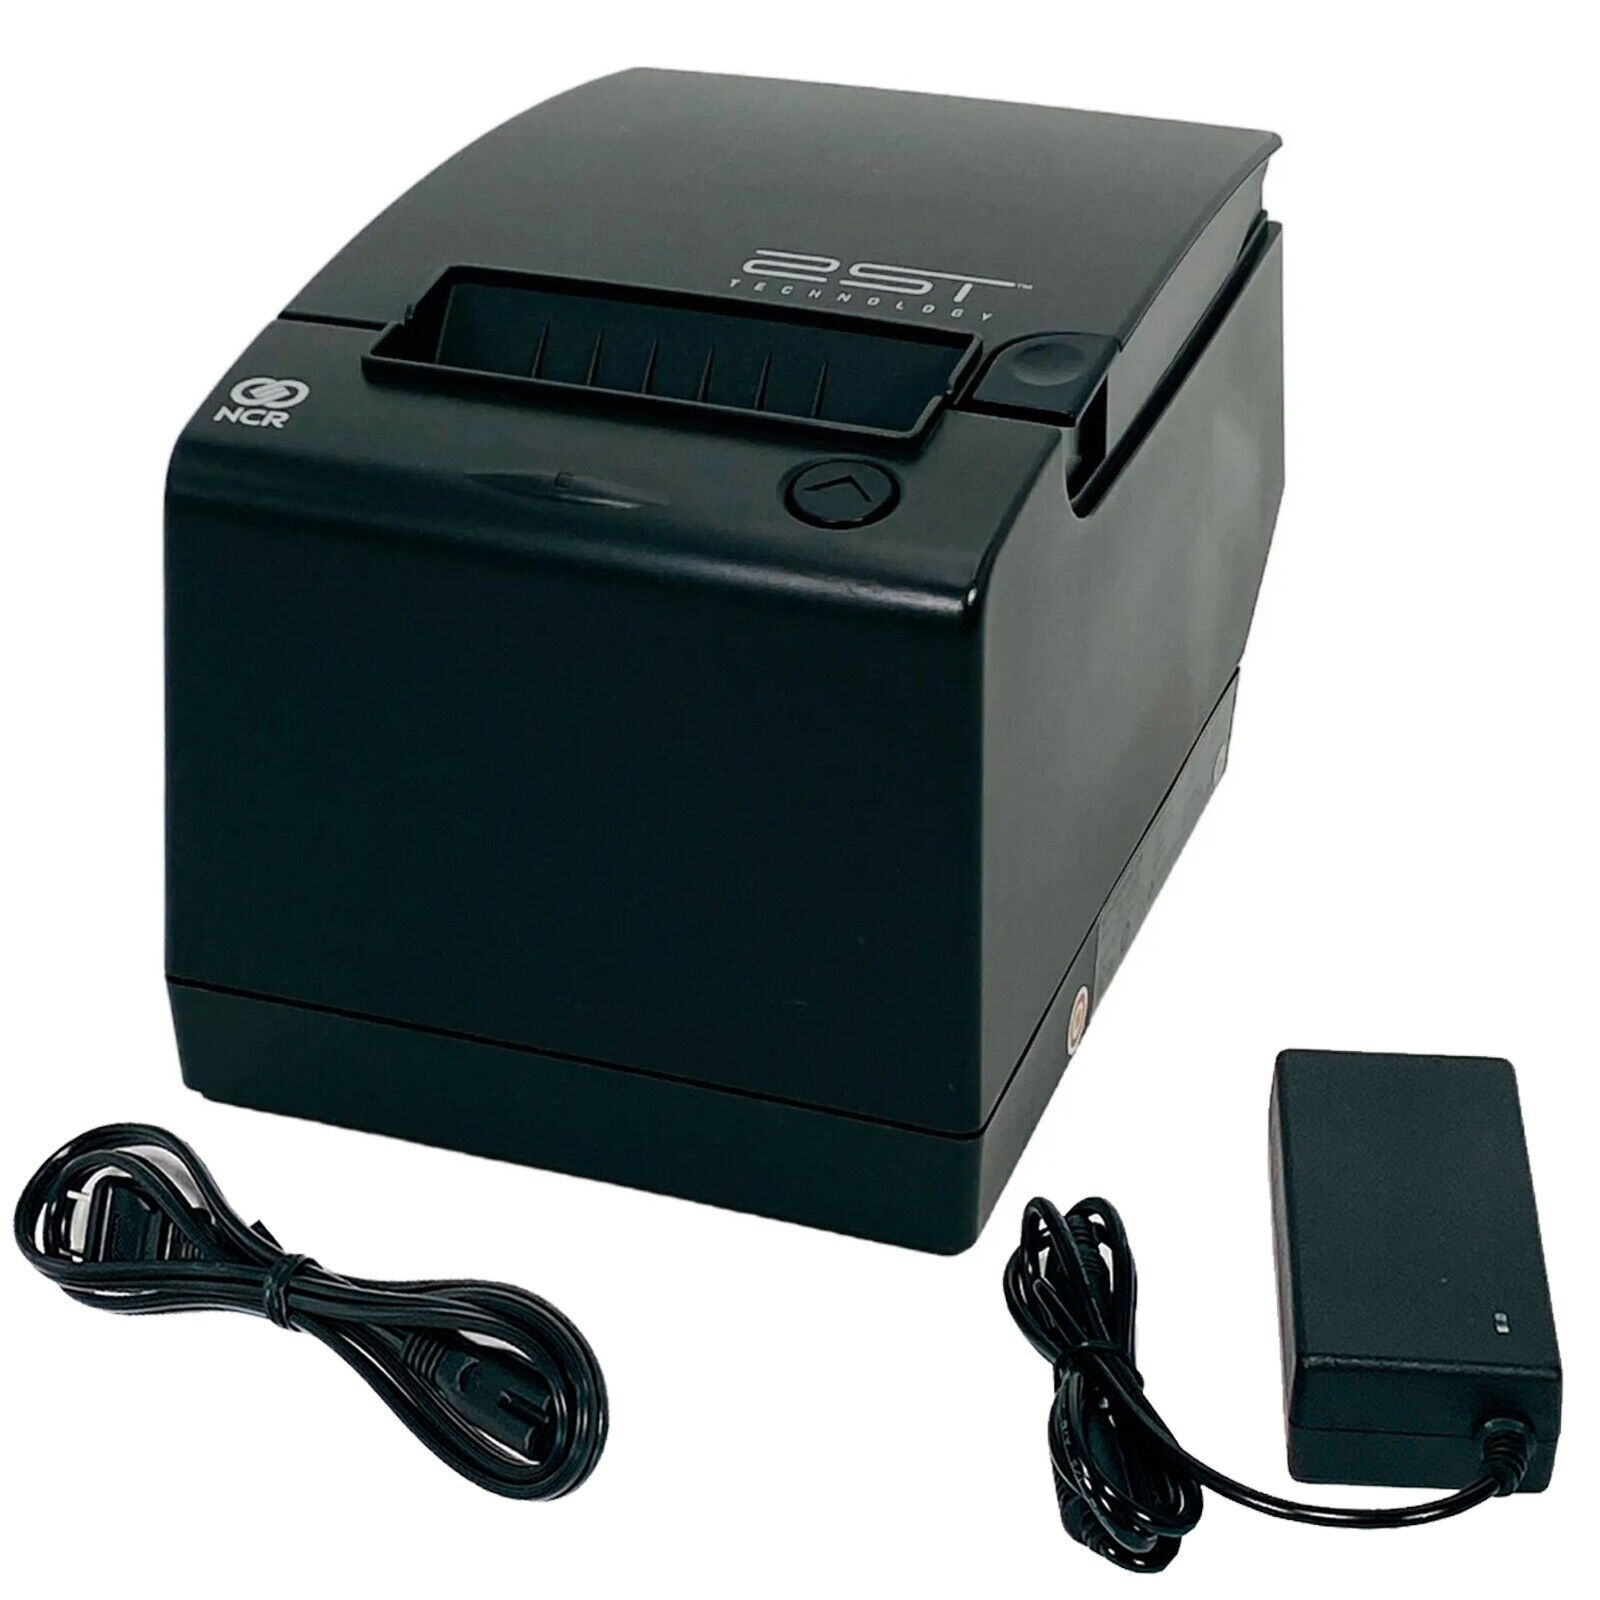 NCR 7198 Thermal POS Receipt Printer for Kitchen Restaurant Bar Cafeteria TESTED